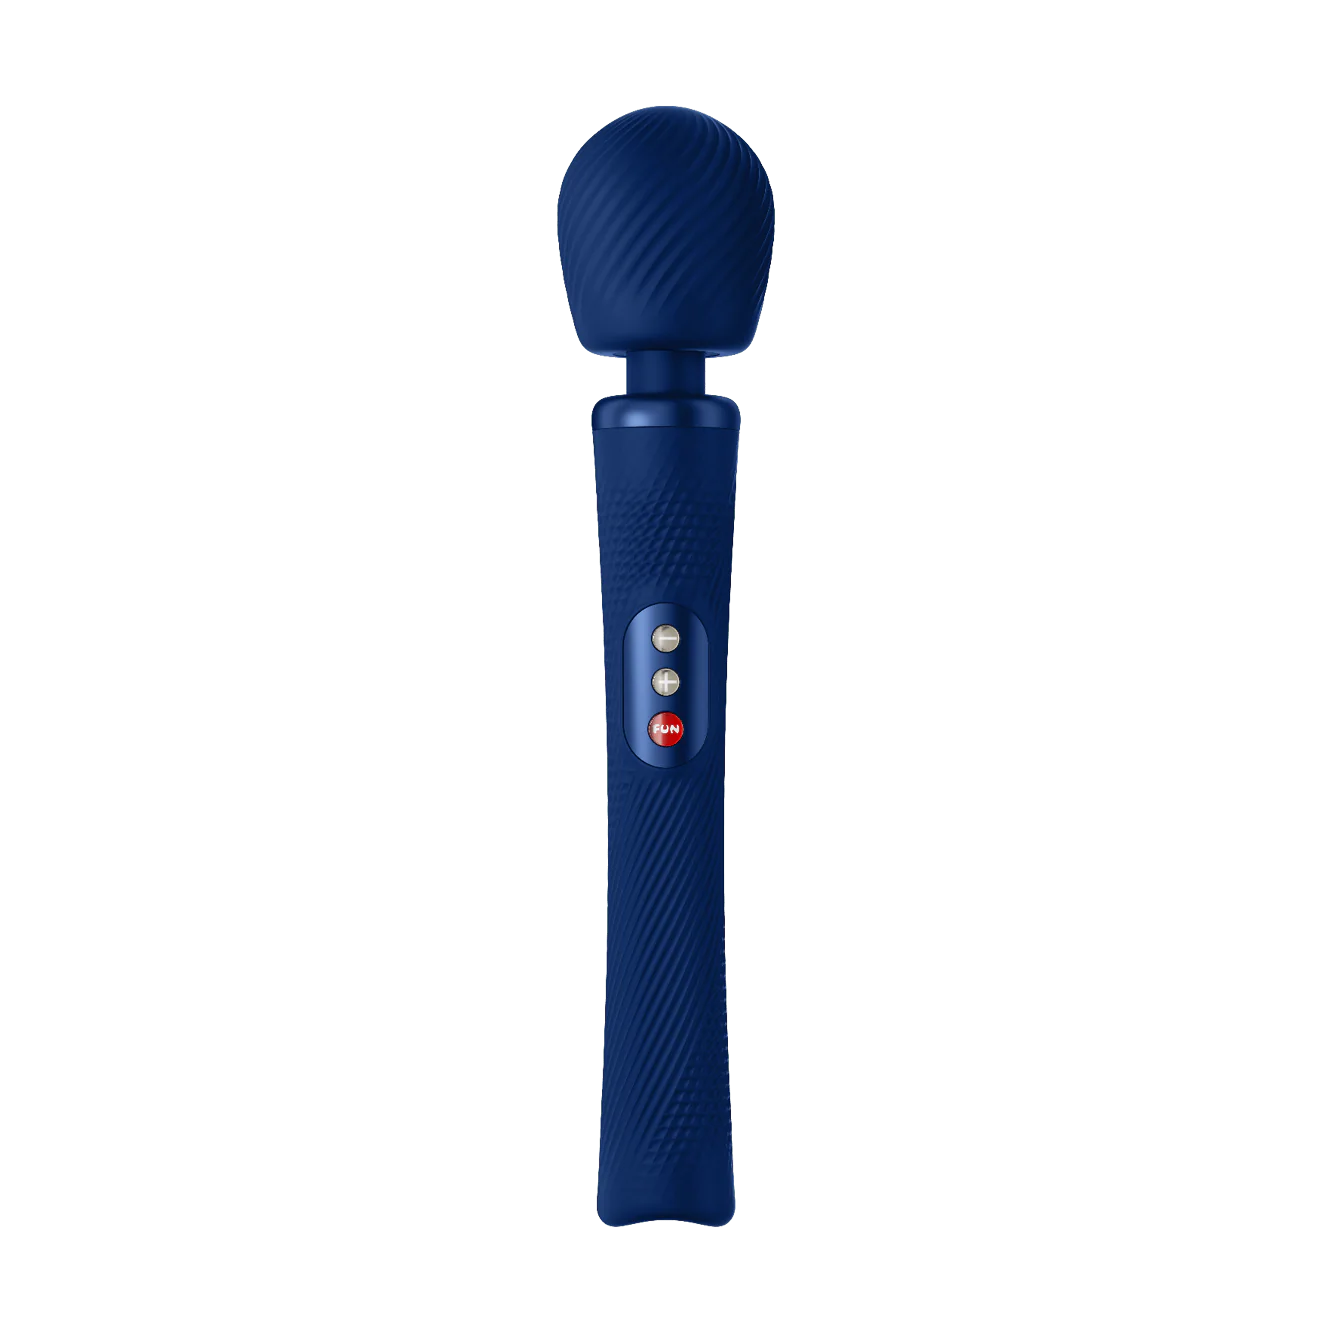 A dark blue wand with verticle ridged texture on the head and texture on the handle for grip. The middle of the handle has a three button interface, one plus button, one minus button, and one on/off button.